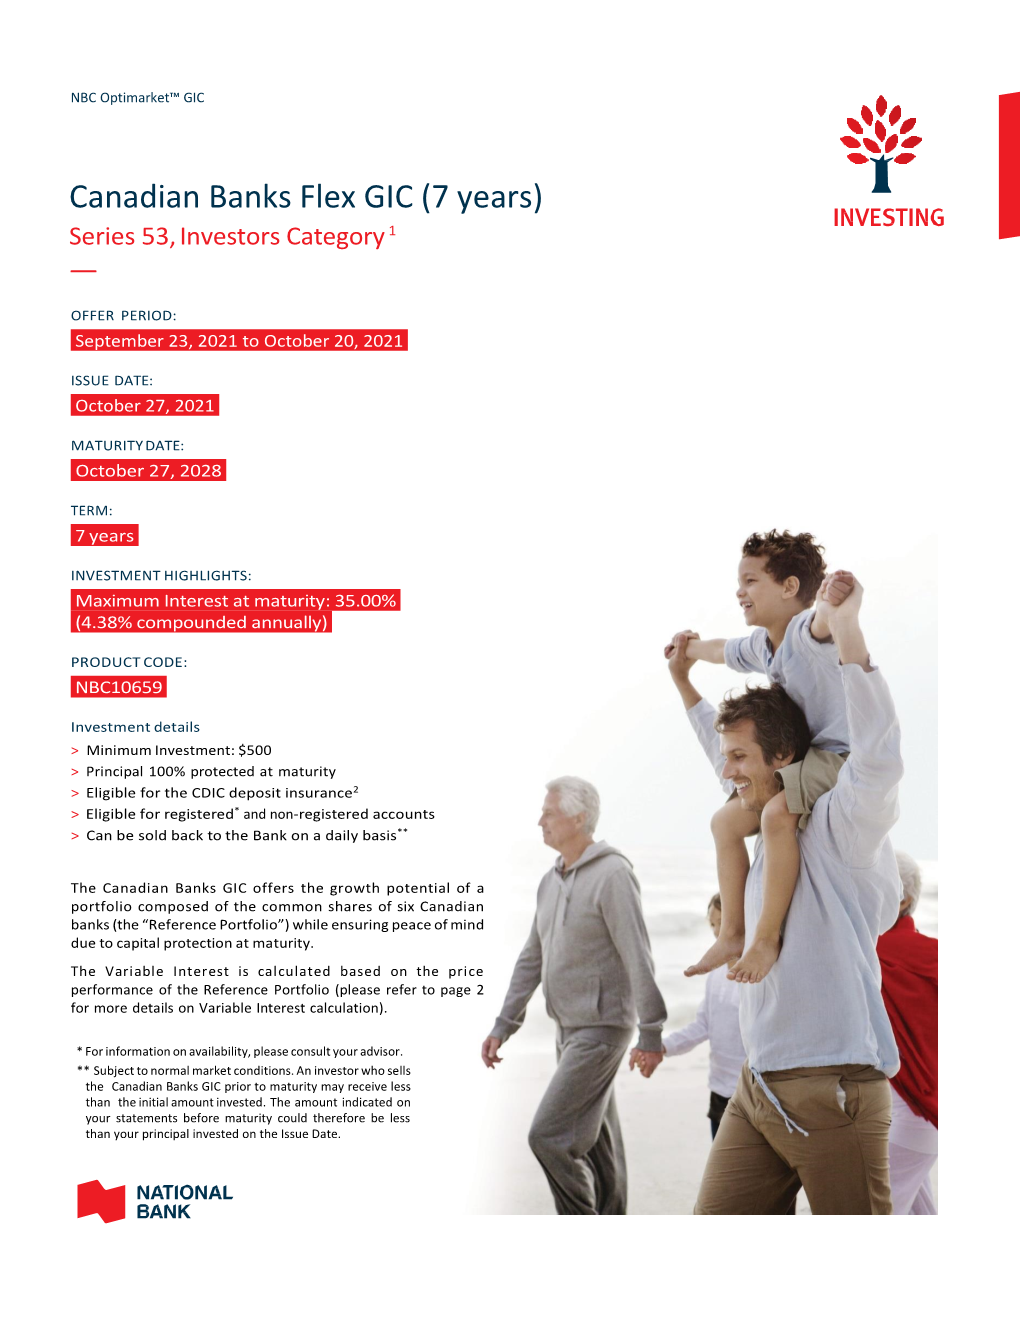 Canadian Banks Flex GIC (7 Years) Series 53, Investors Category 1 —